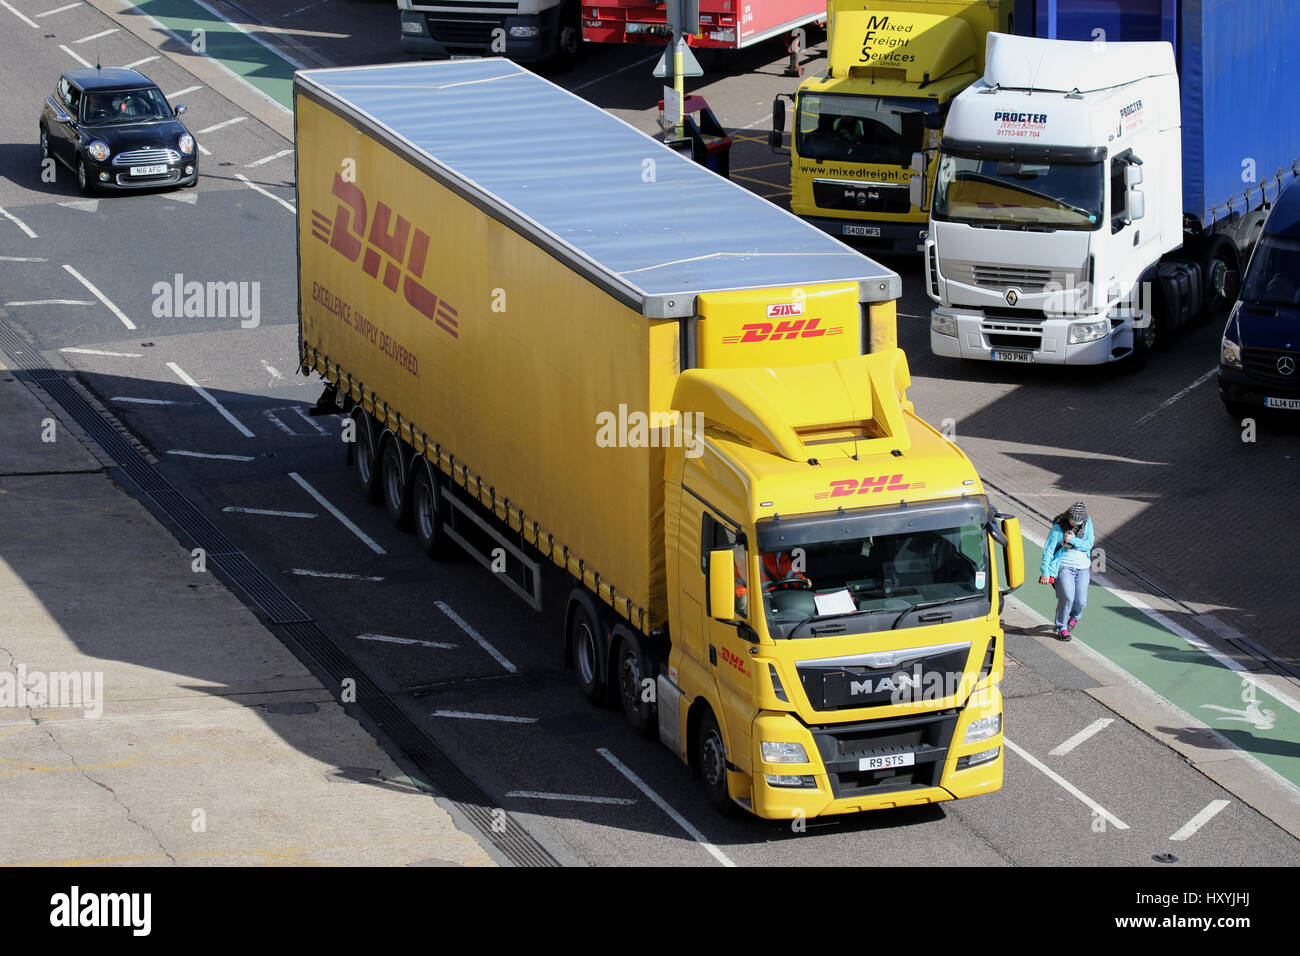 DHL LORRY TRUCK Stock Photo